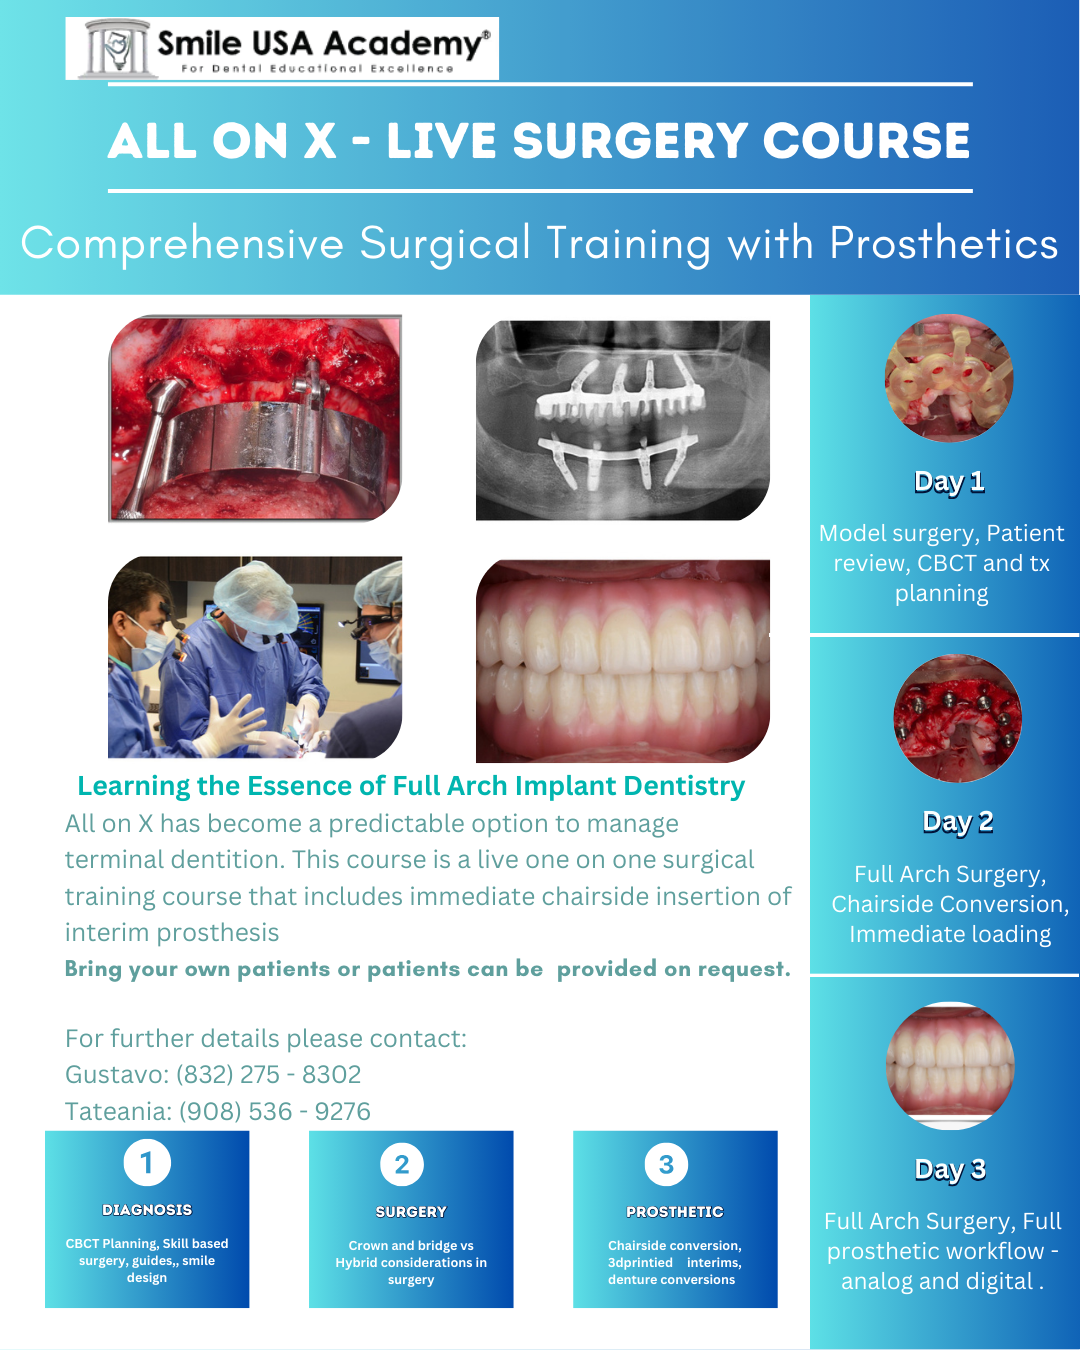 All On X Live Surgery Course: Comprehensive Surgical Training with Prosthetics - Houston